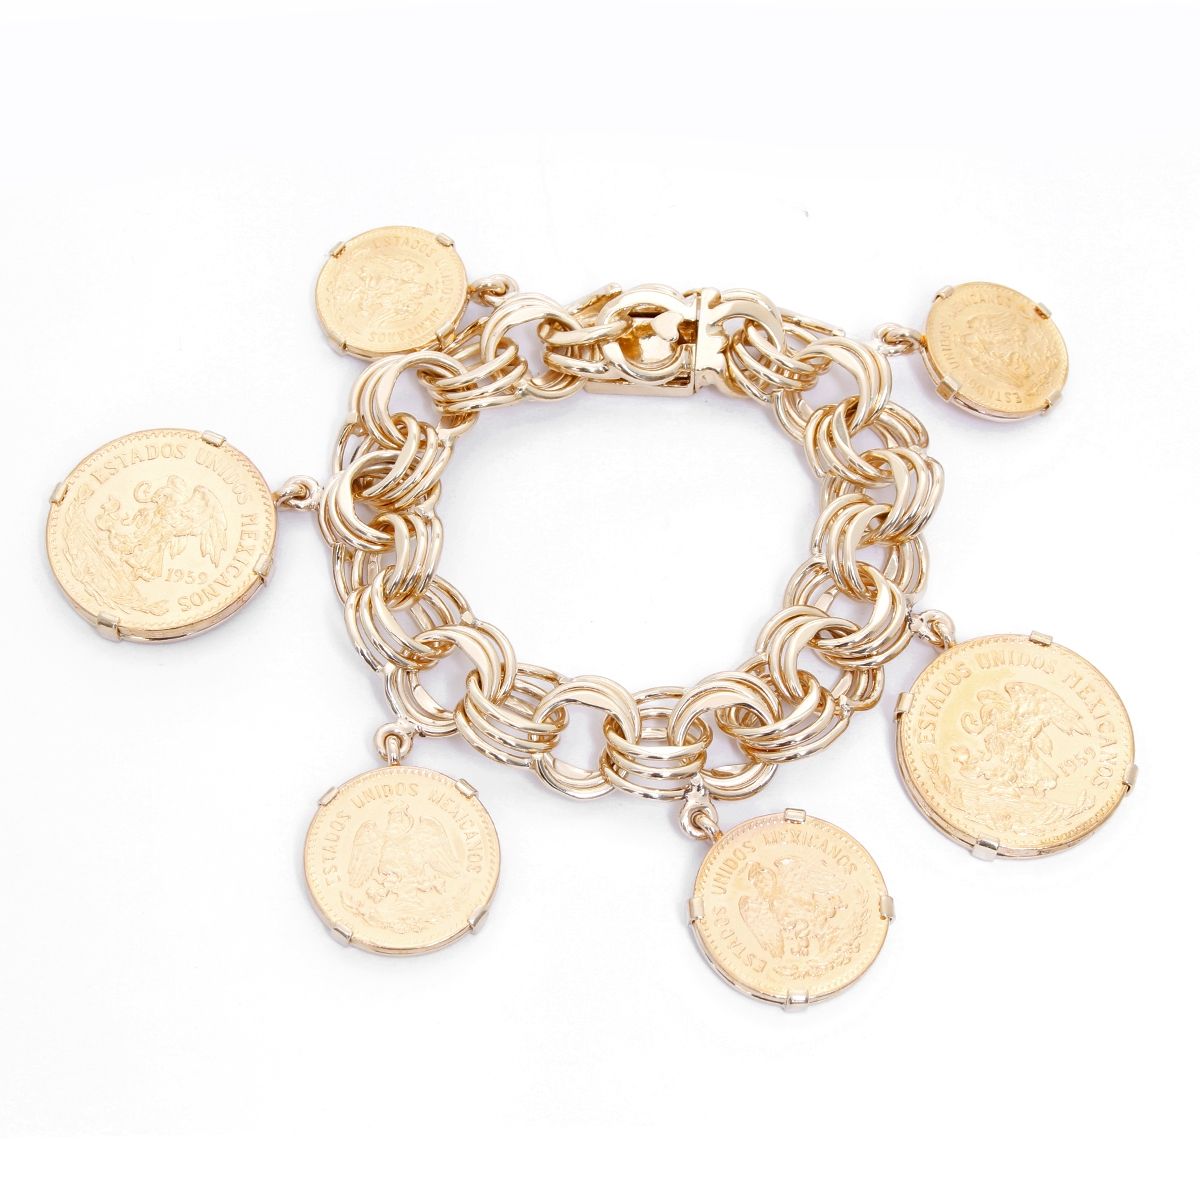 Make a Statement with this Handcrafted Gold Coin Charm Bracelet  The Bay  House